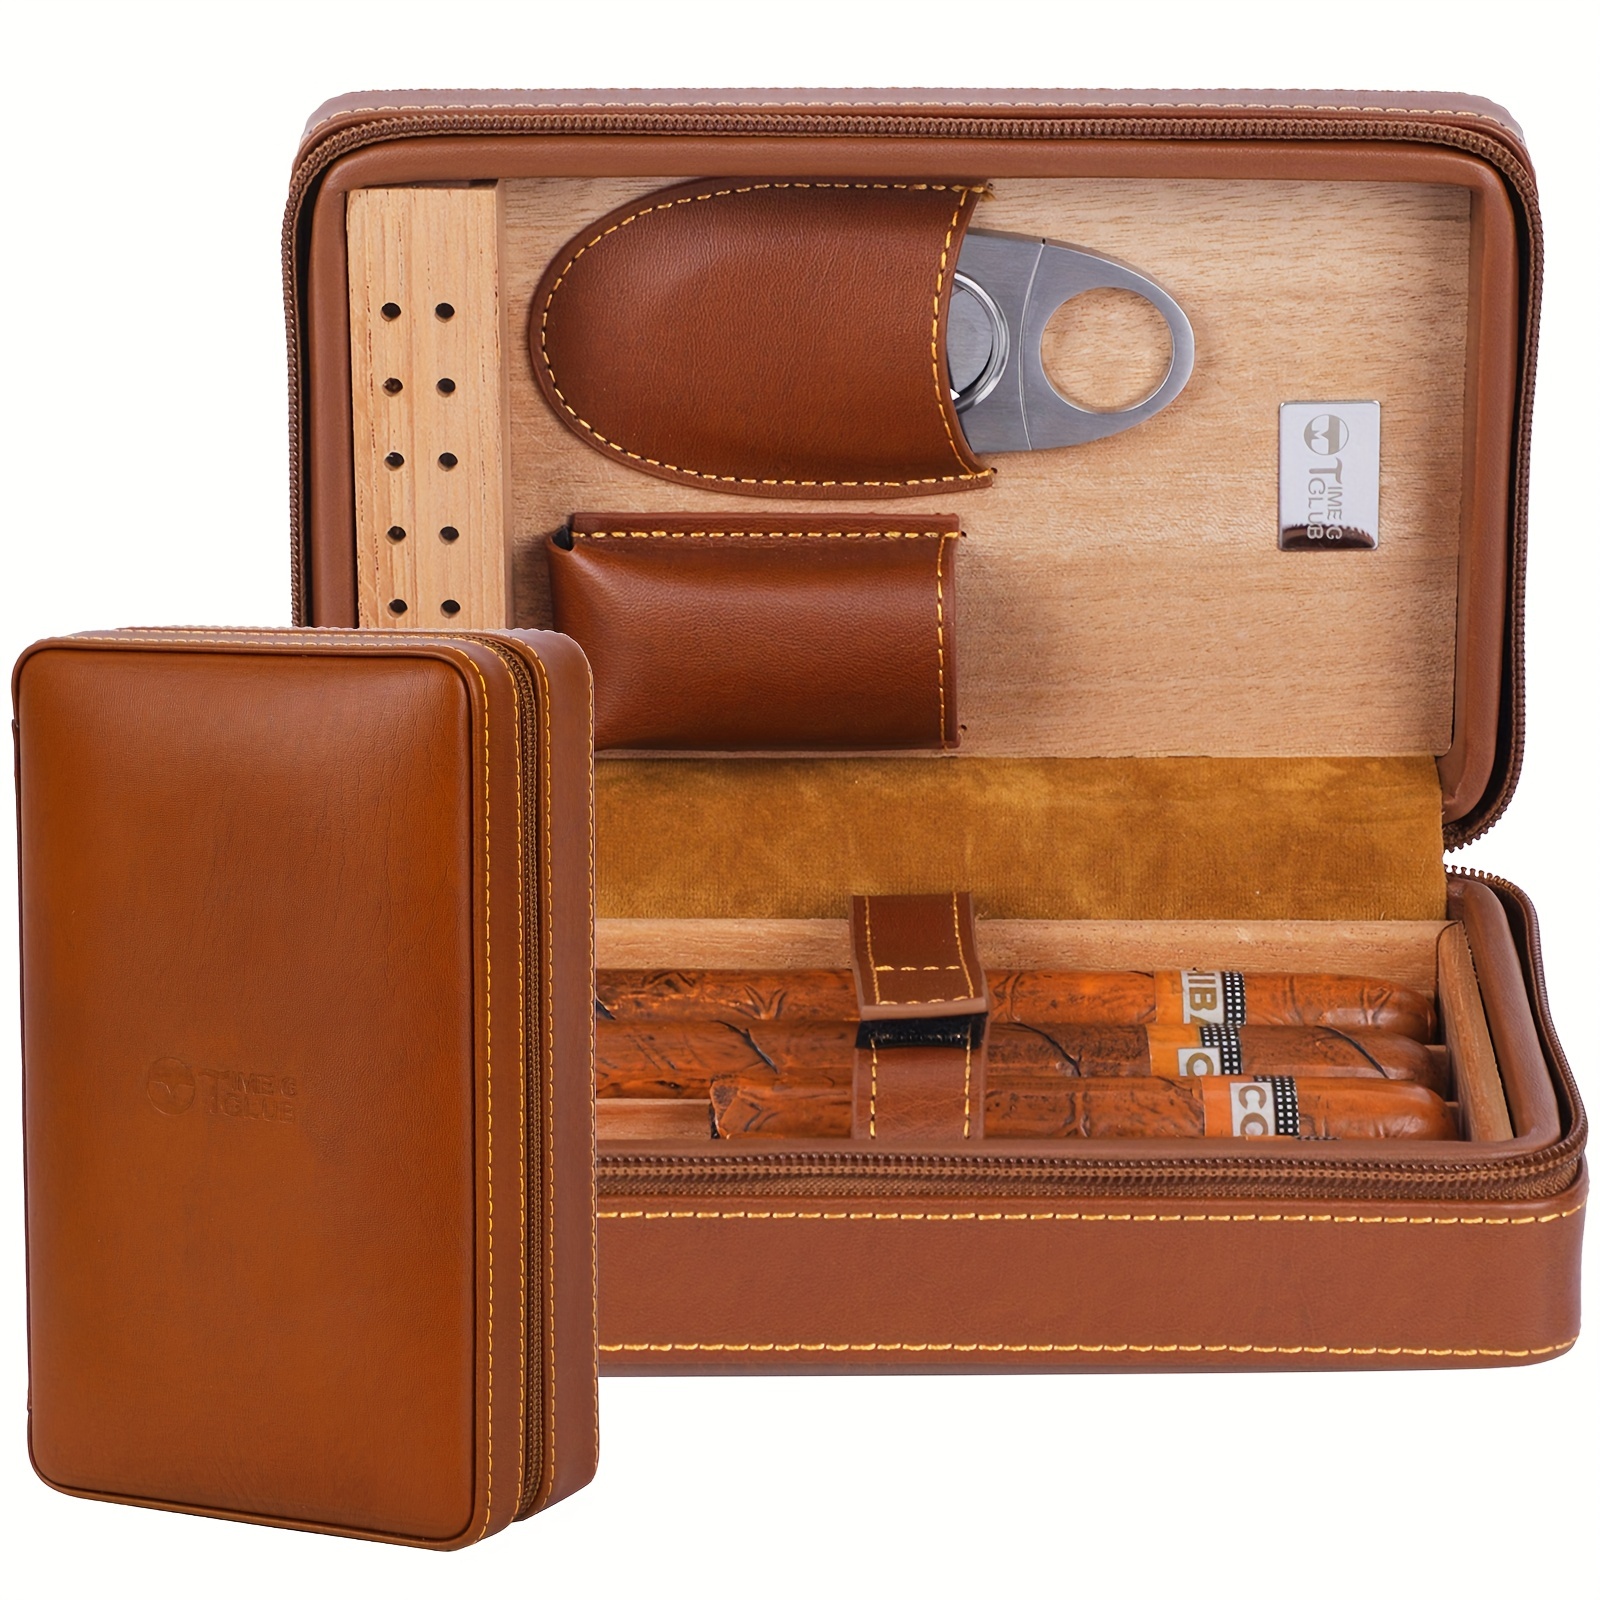 Leather Cigar Case for 6 to 15 Cigars - Cigar Case Leather Small & Portable